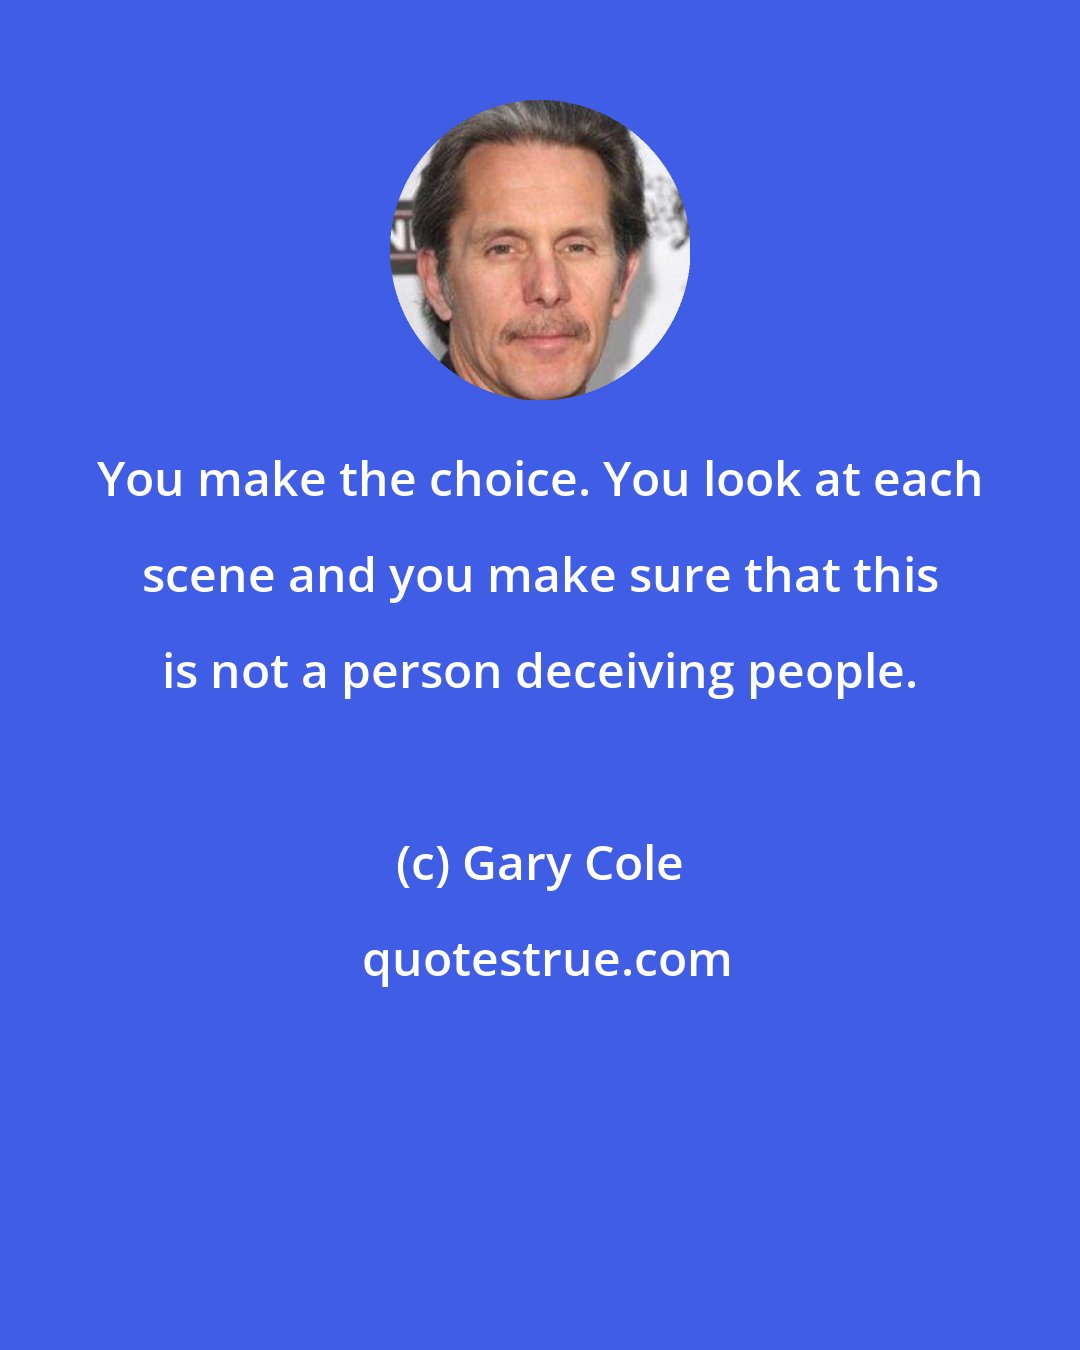 Gary Cole: You make the choice. You look at each scene and you make sure that this is not a person deceiving people.